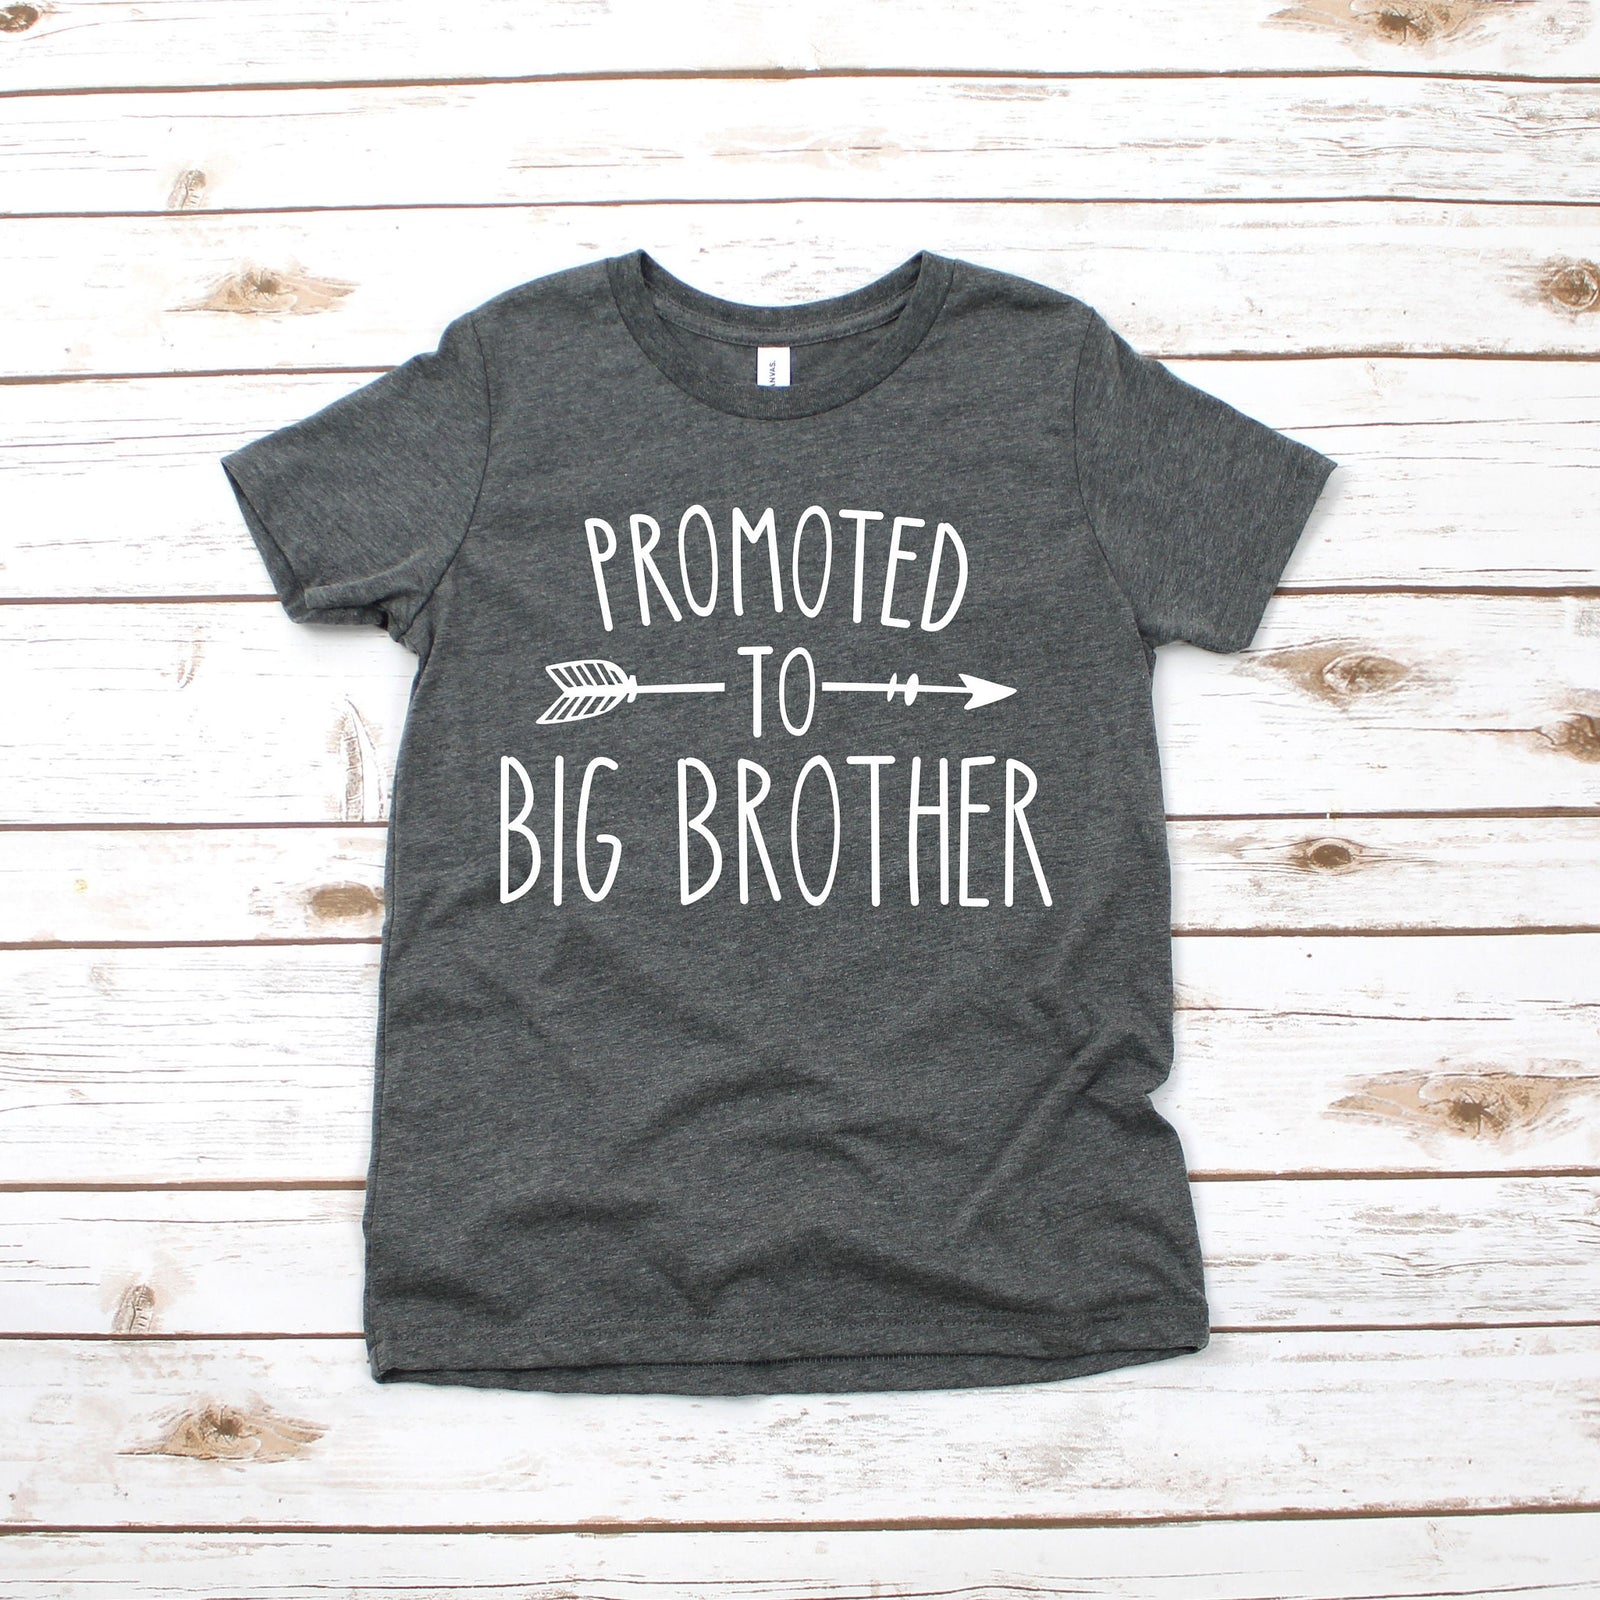 Promoted to Big Brother T Shirt - Big Brother T shrit - Baby Announcement Shirt - Family Announcement